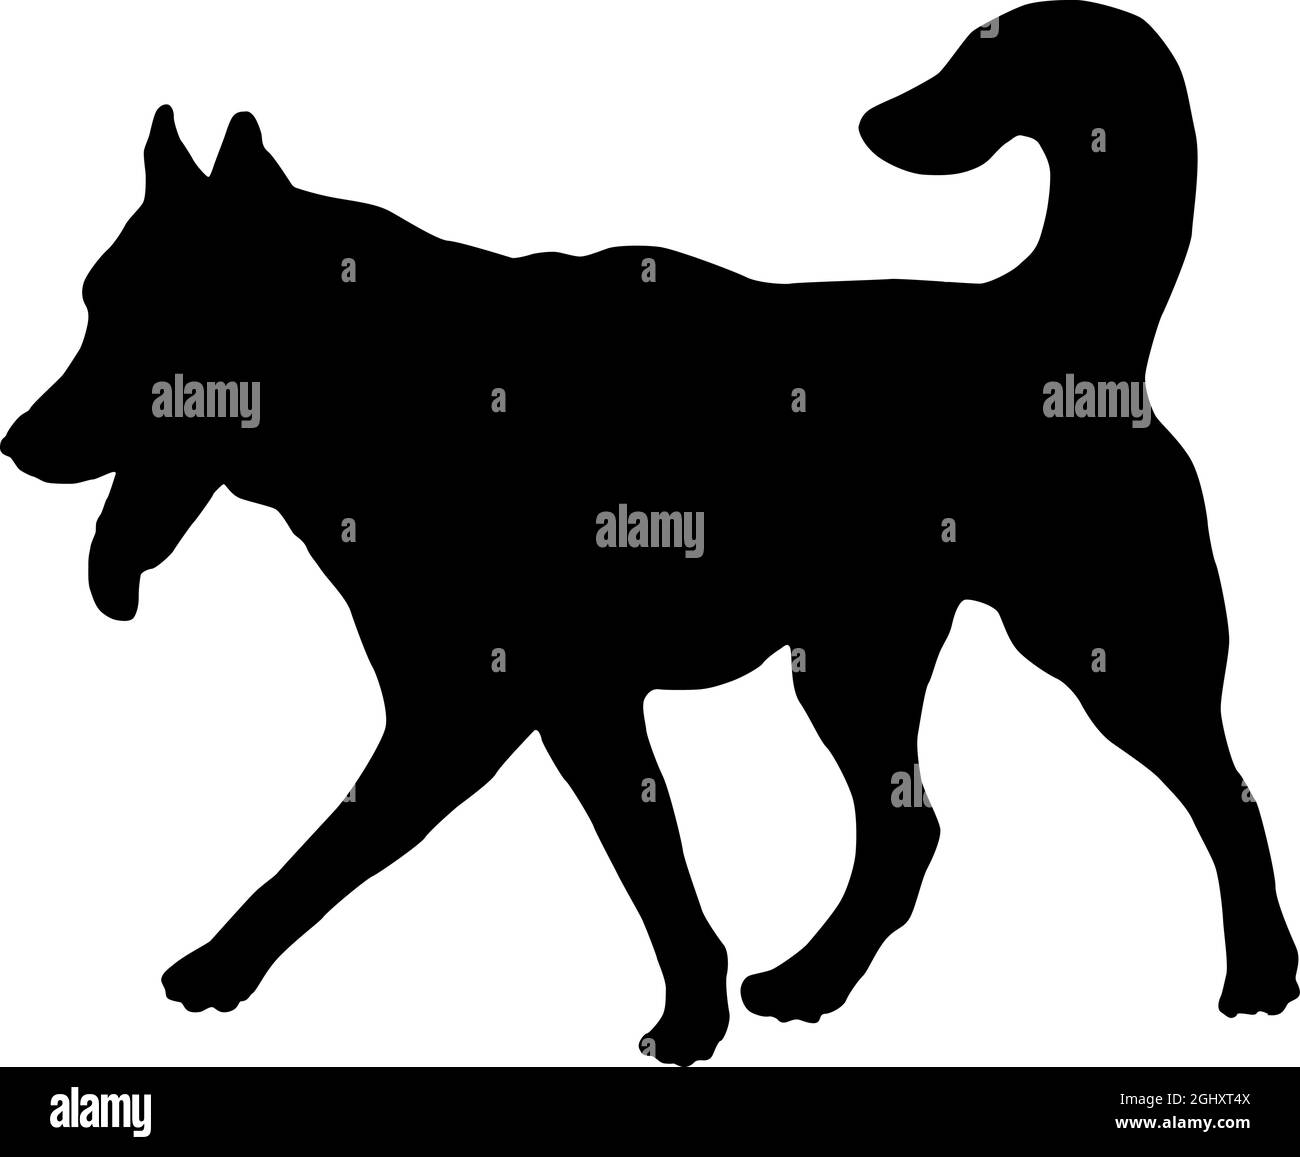 Walking siberian husky puppy. Black dog silhouette. Pet animals. Isolated on a white background. Vector illustration. Stock Vector